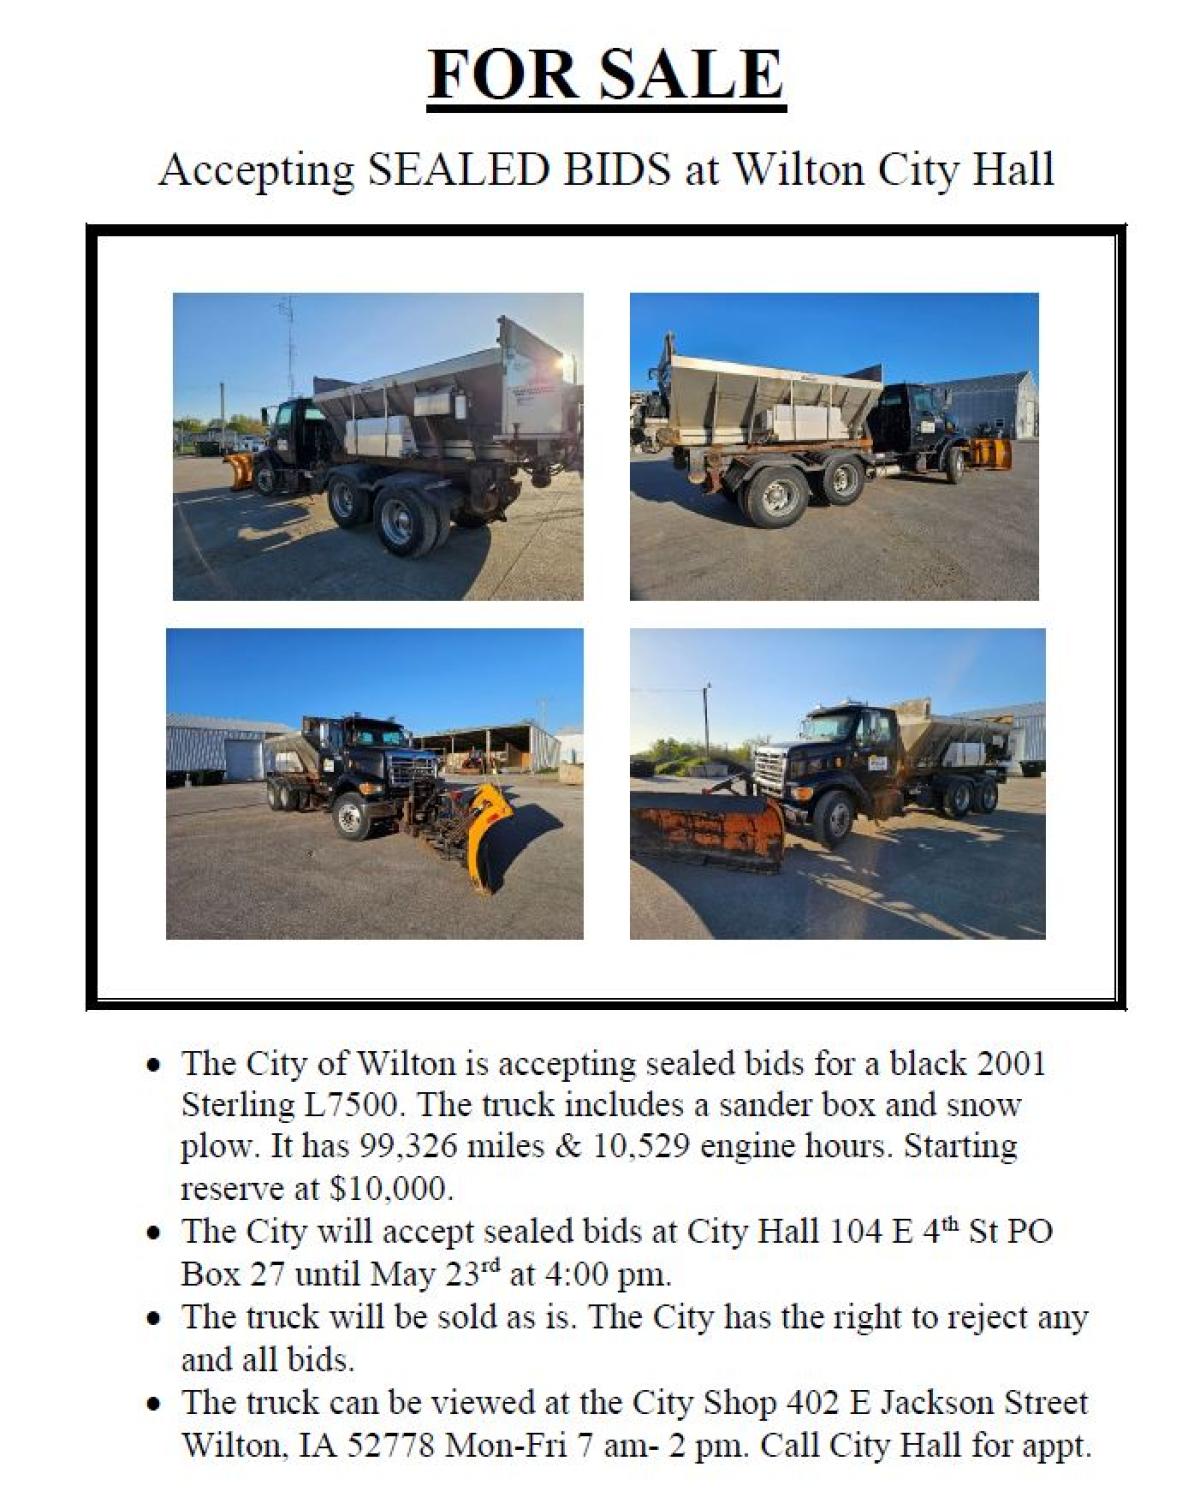 •	The City of Wilton is accepting sealed bids for a black 2001 Sterling L7500. The truck includes a sander box and snow plow. It has 99,326 miles & 10,529 engine hours. Starting reserve at $10,000.  •	The City will accept sealed bids at City Hall 104 E 4th St PO Box 27 until May 23rd at 4:00 pm.  •	The truck will be sold as is. The City has the right to reject any and all bids.  •	The truck can be viewed at the City Shop 402 E Jackson Street Wilton, IA 52778 Mon-Fri 7 am- 2 pm. Call City Hall for appt.